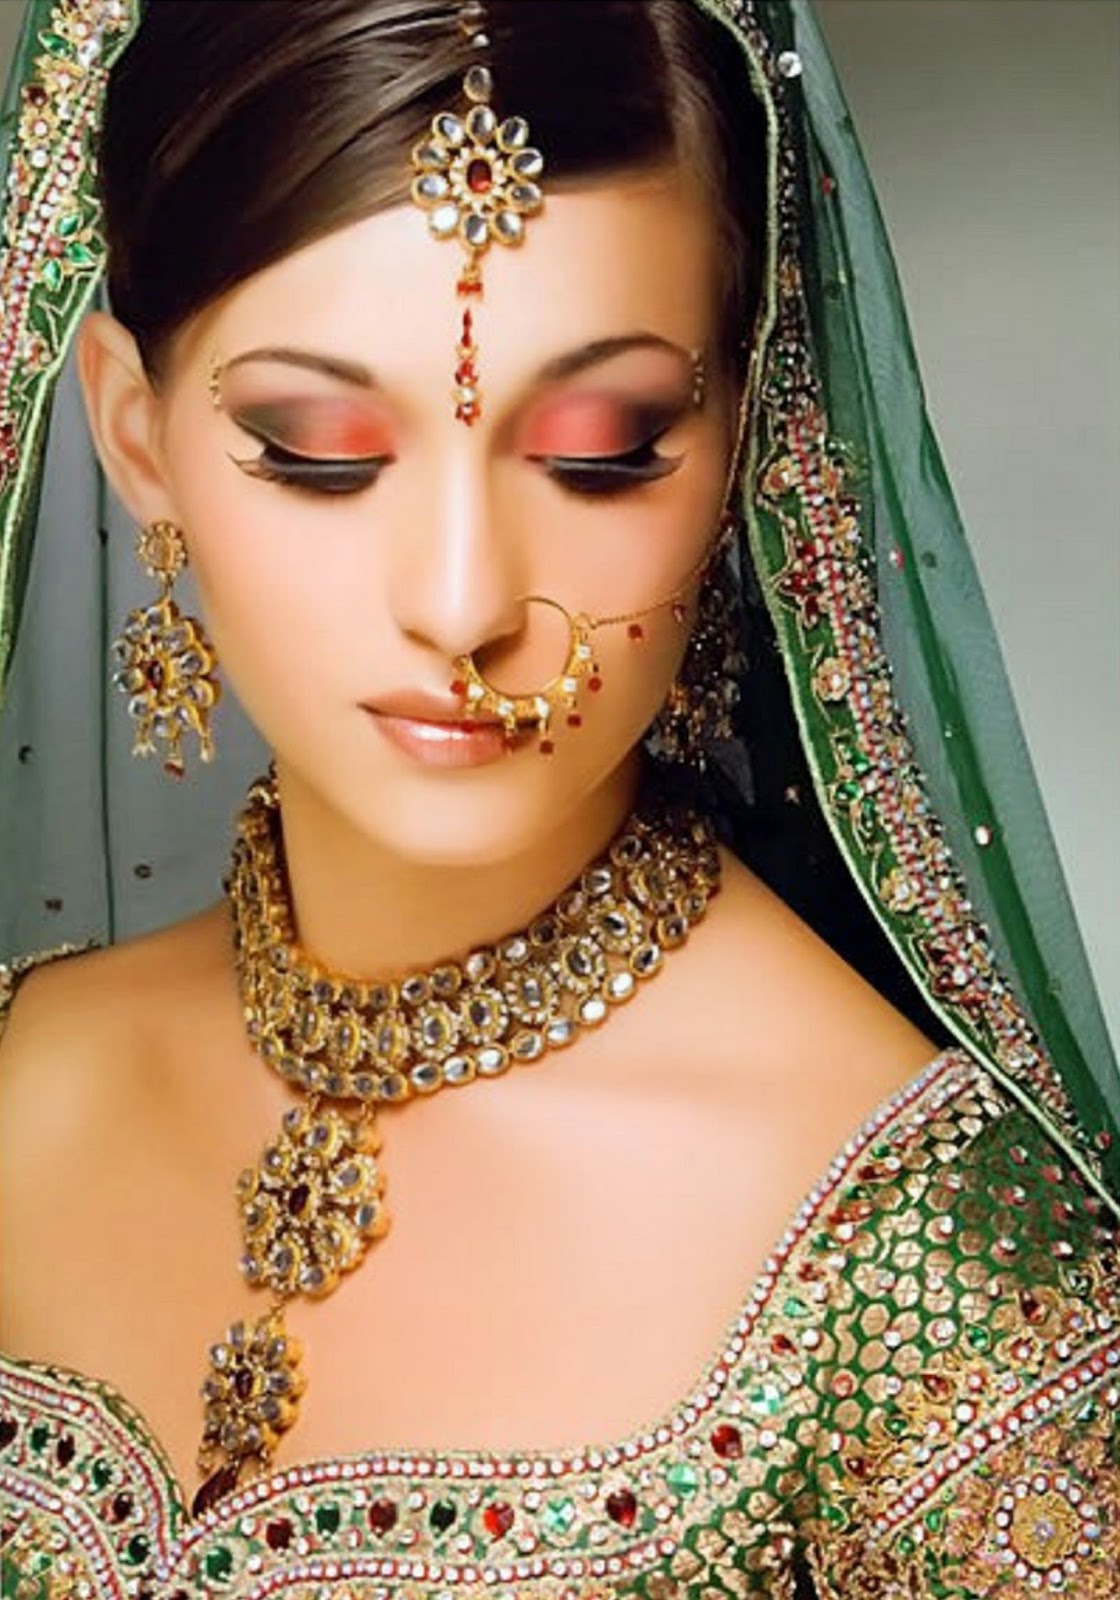 Latest Bridal Dresses, Make up & Jewelry Wallpapers Free Download